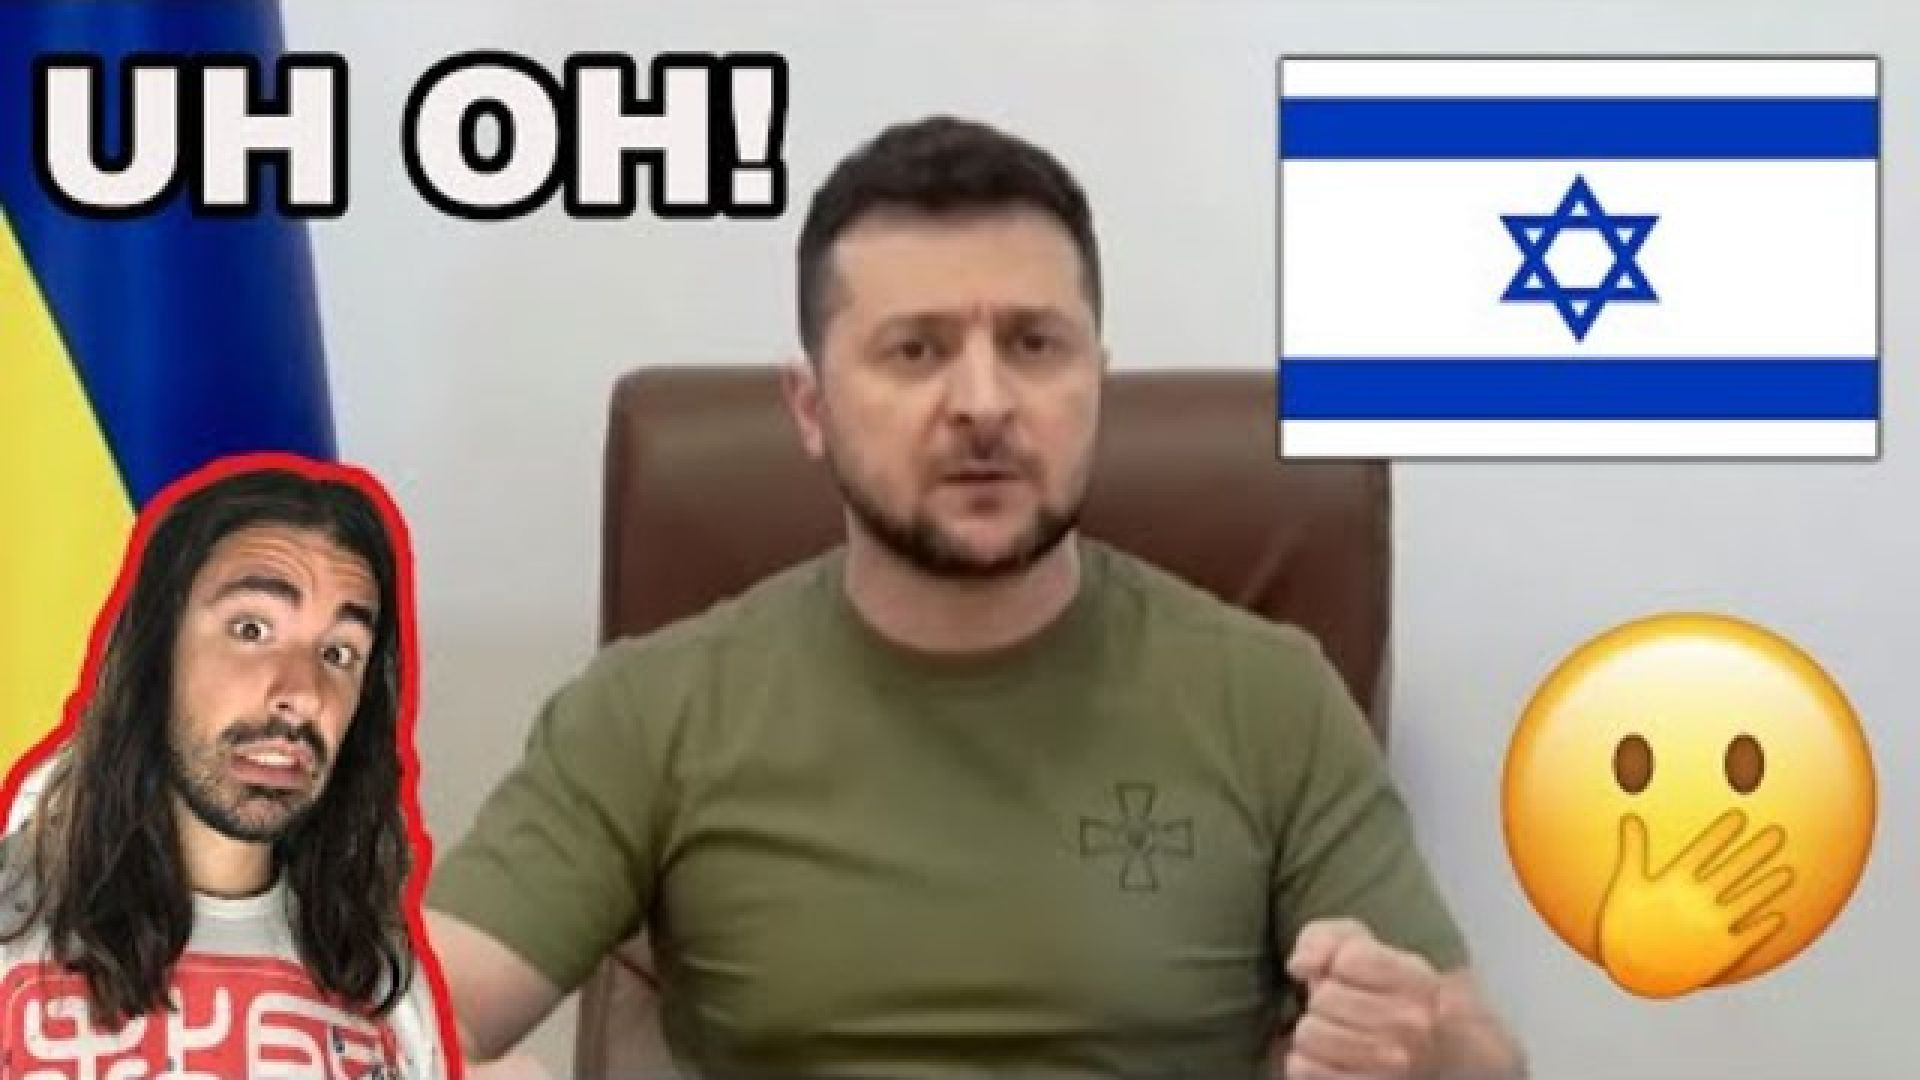 ⁣ZELENSKY BANS POLITICAL PARTIES, CONSOLIDATES MEDIA & UPSETS ISRAEL WITH HIS EXAGGERATED SPEECH!